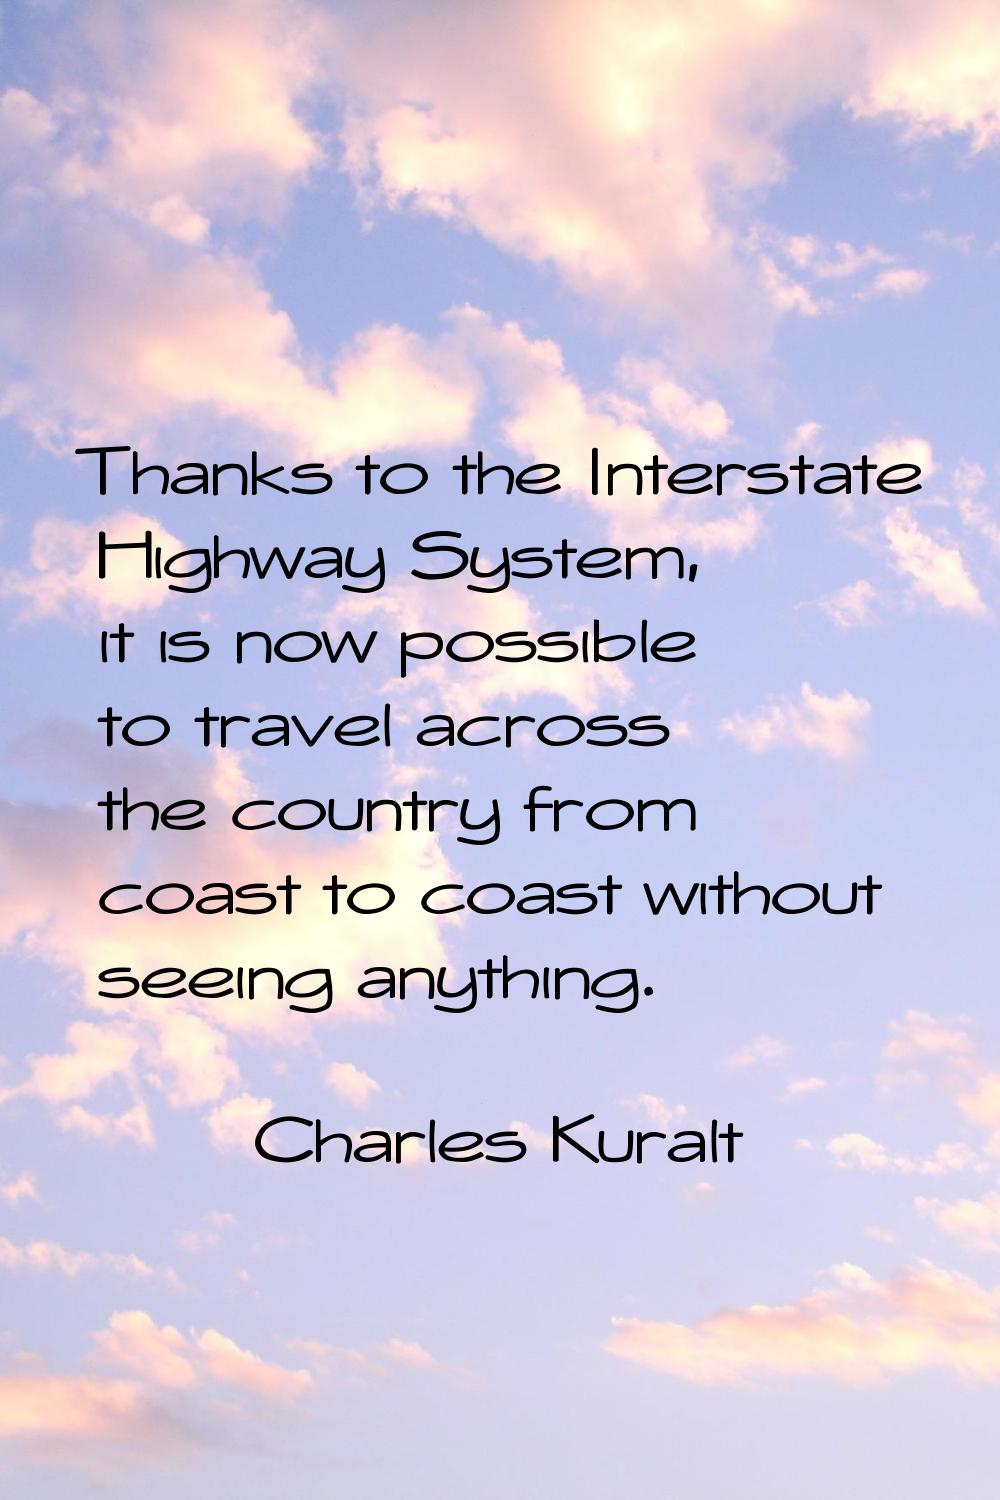 Thanks to the Interstate Highway System, it is now possible to travel across the country from coast